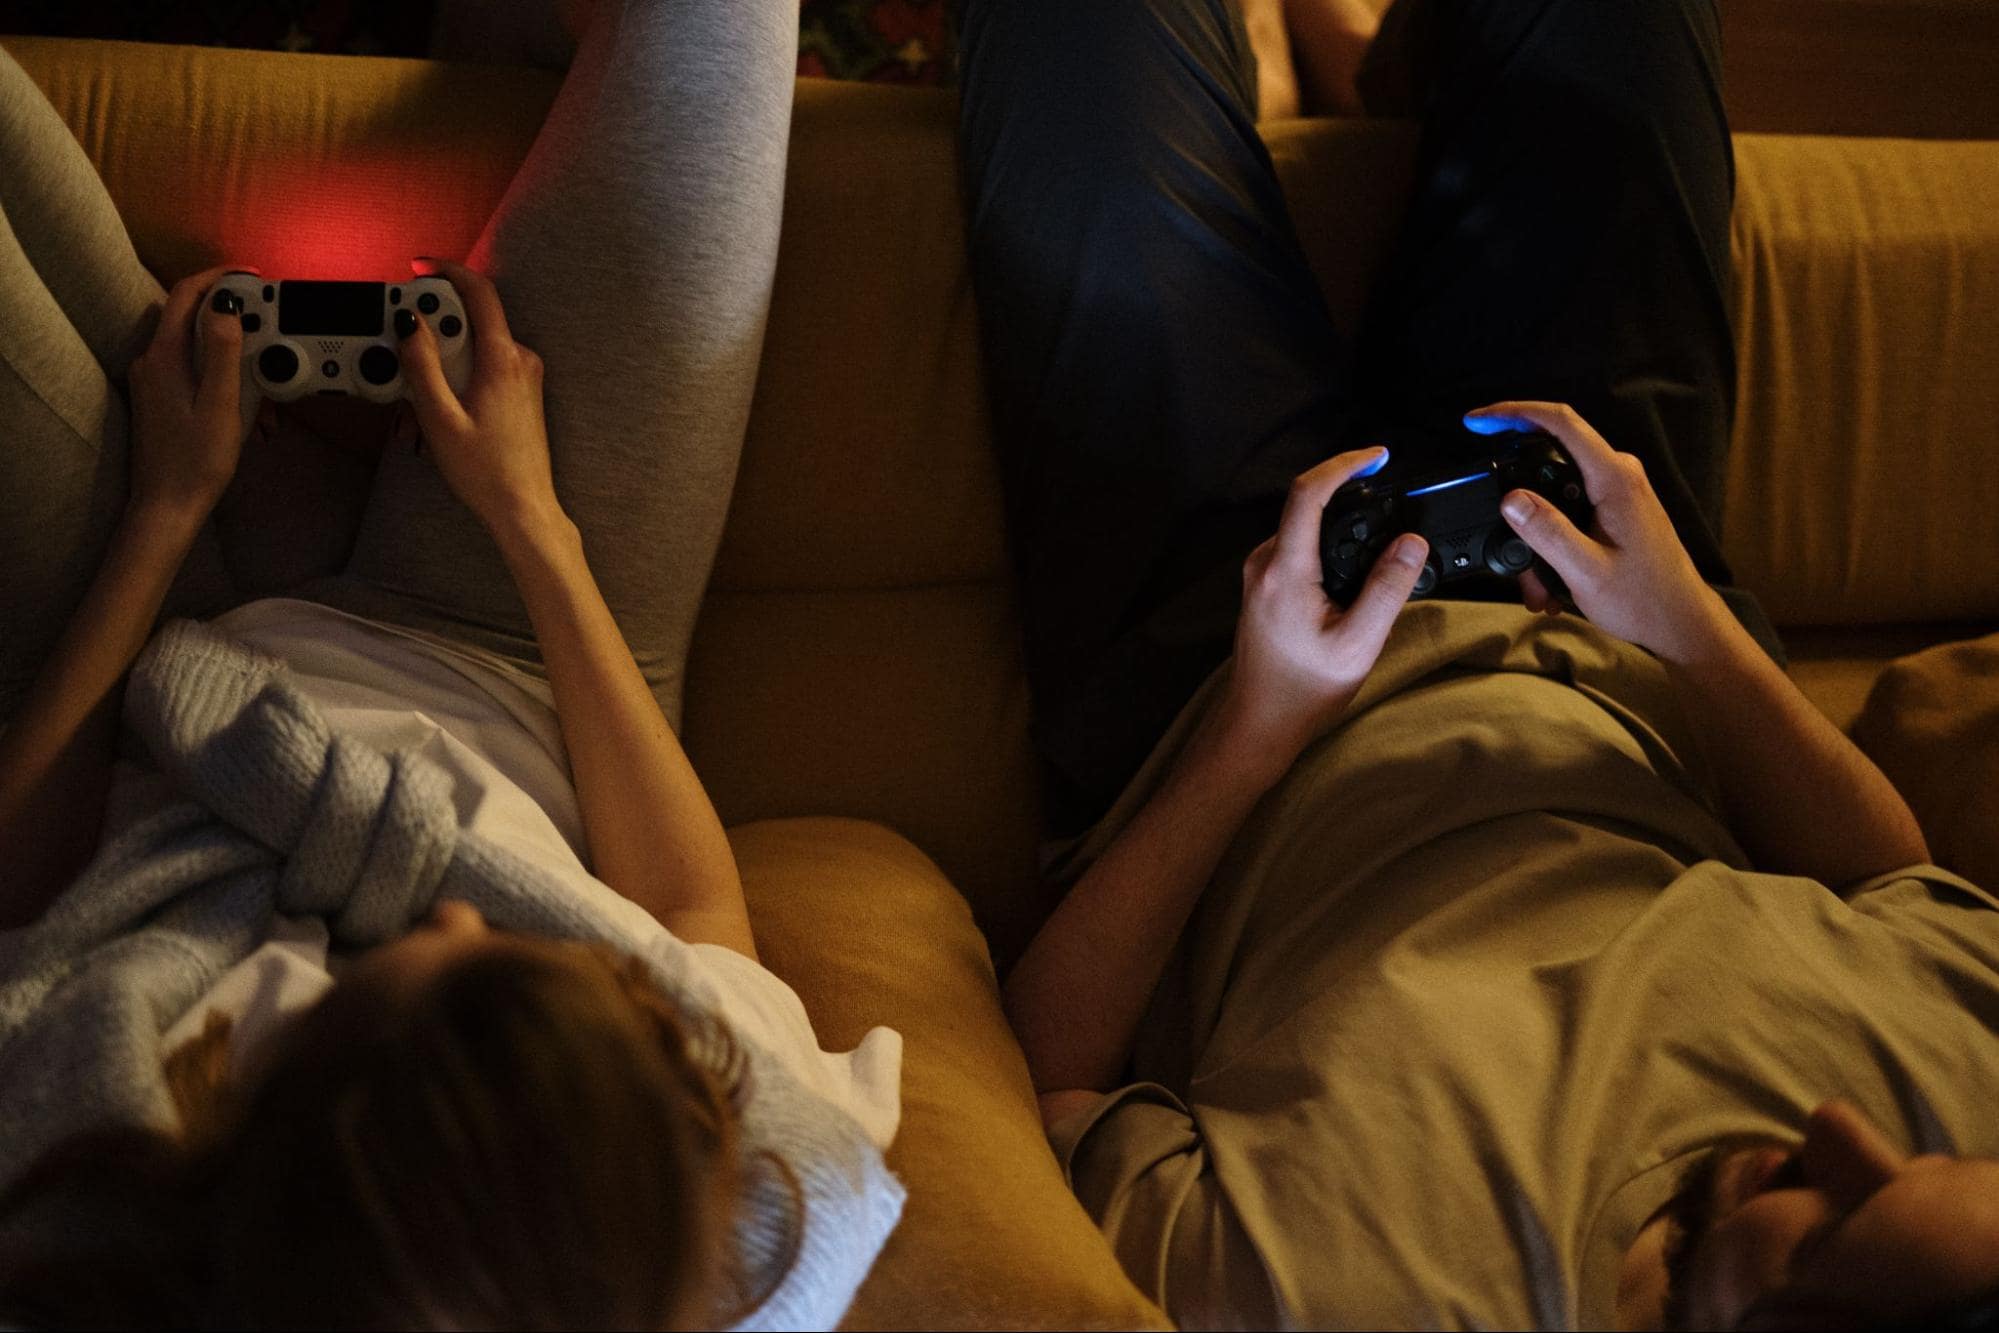 Two people playing with video game controllers